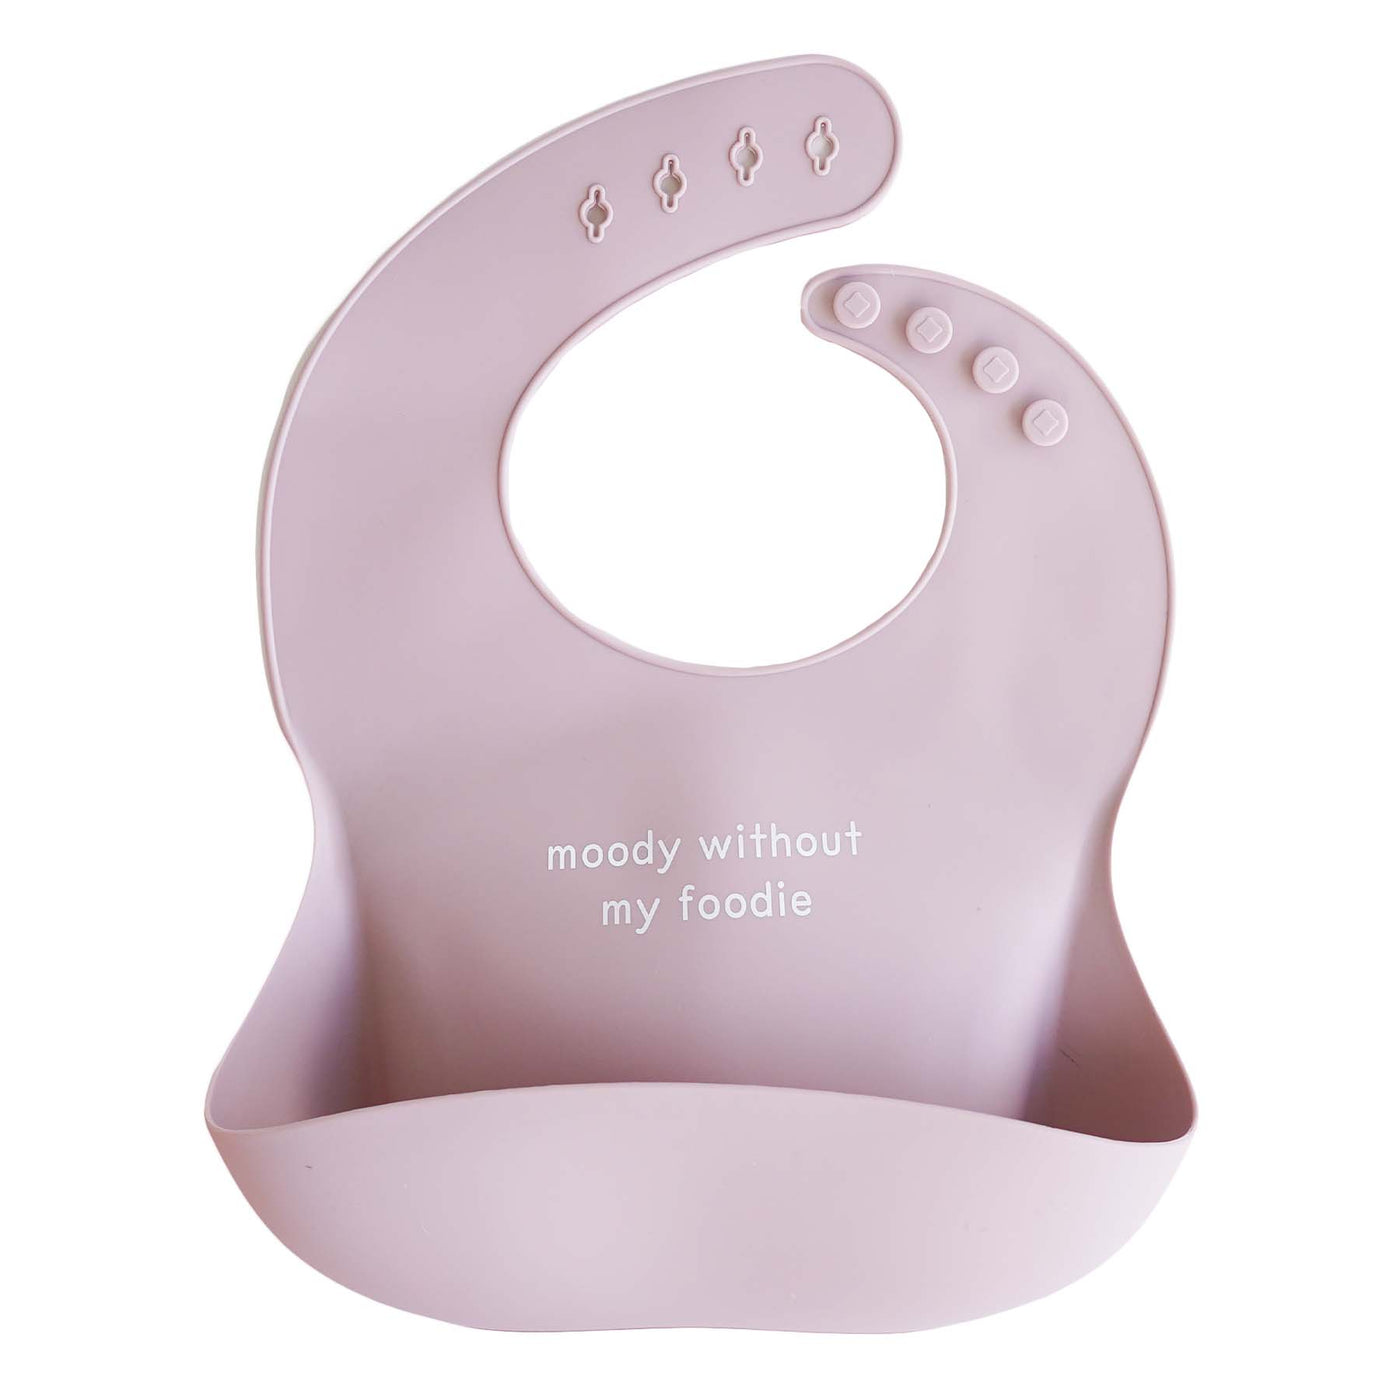 moody without my foodie purple silicone bib for babies 